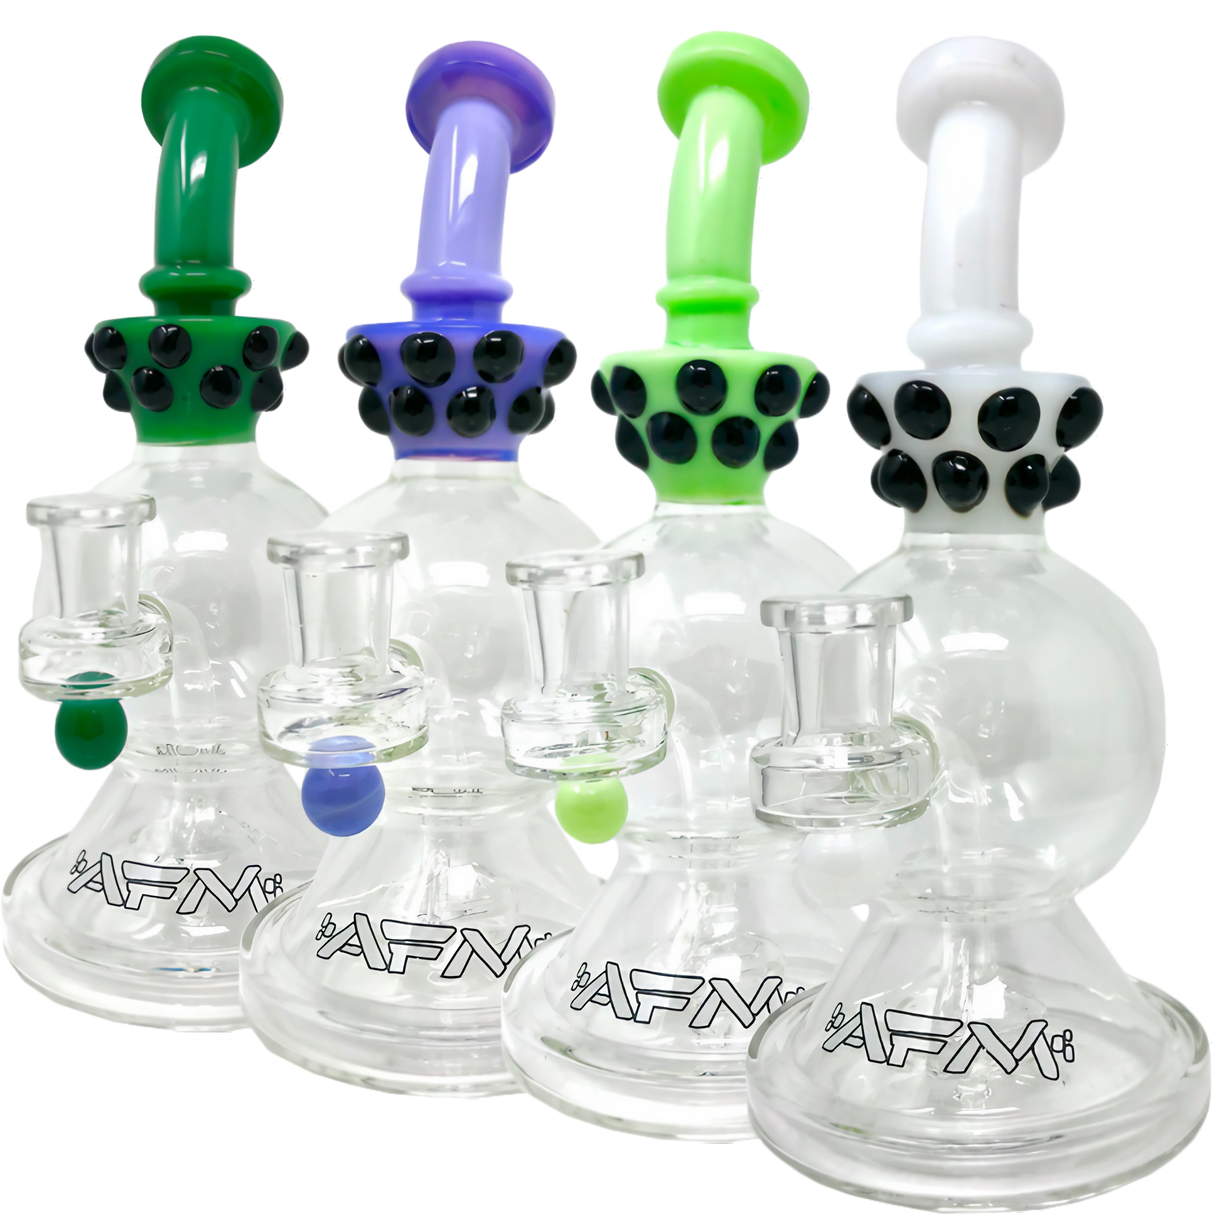 AFM Glass - The Crown Rig 9" collection with Showerhead/UFO percolator, side view on white background